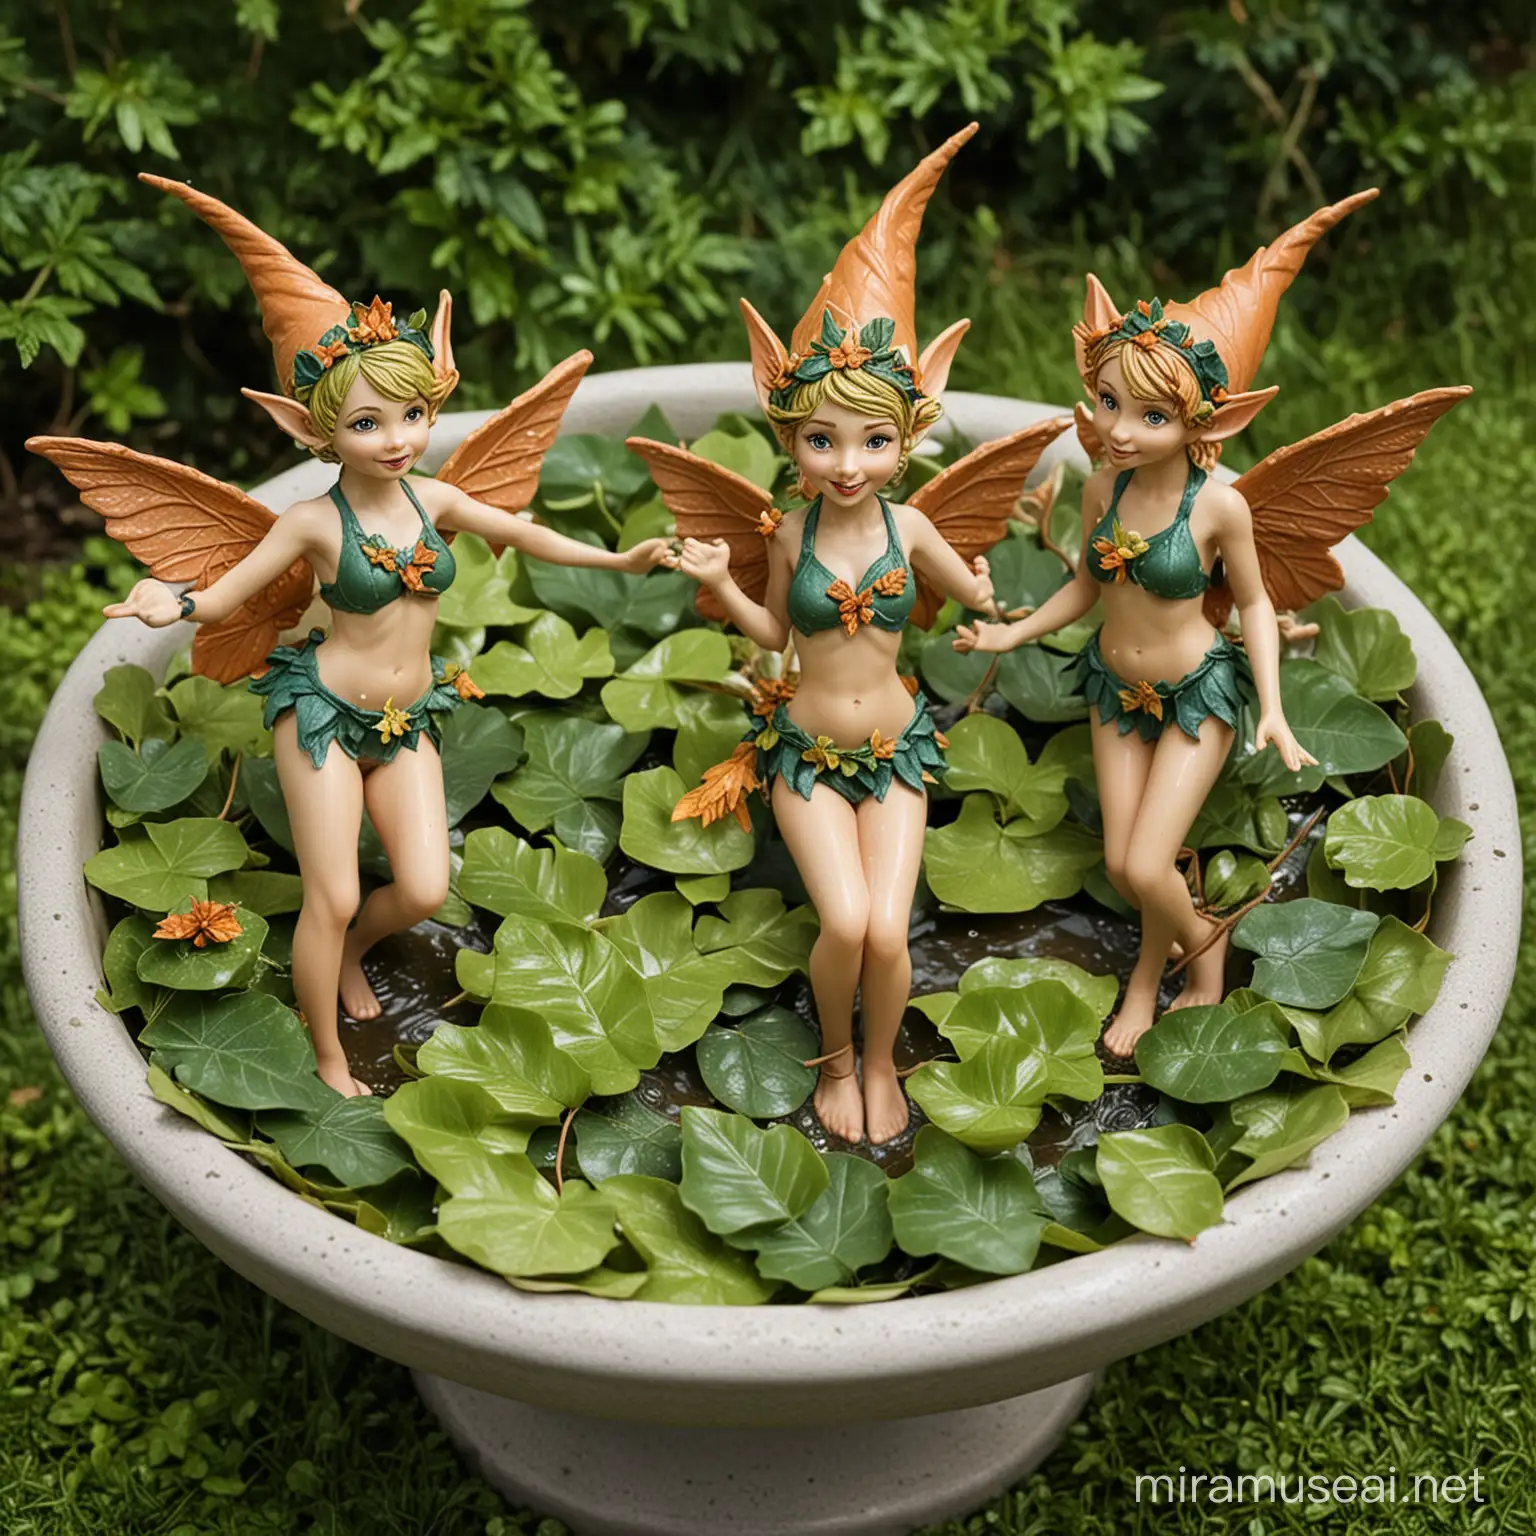 Pixie Elves Bathing in Bird Bath with Leaf Bathing Suits